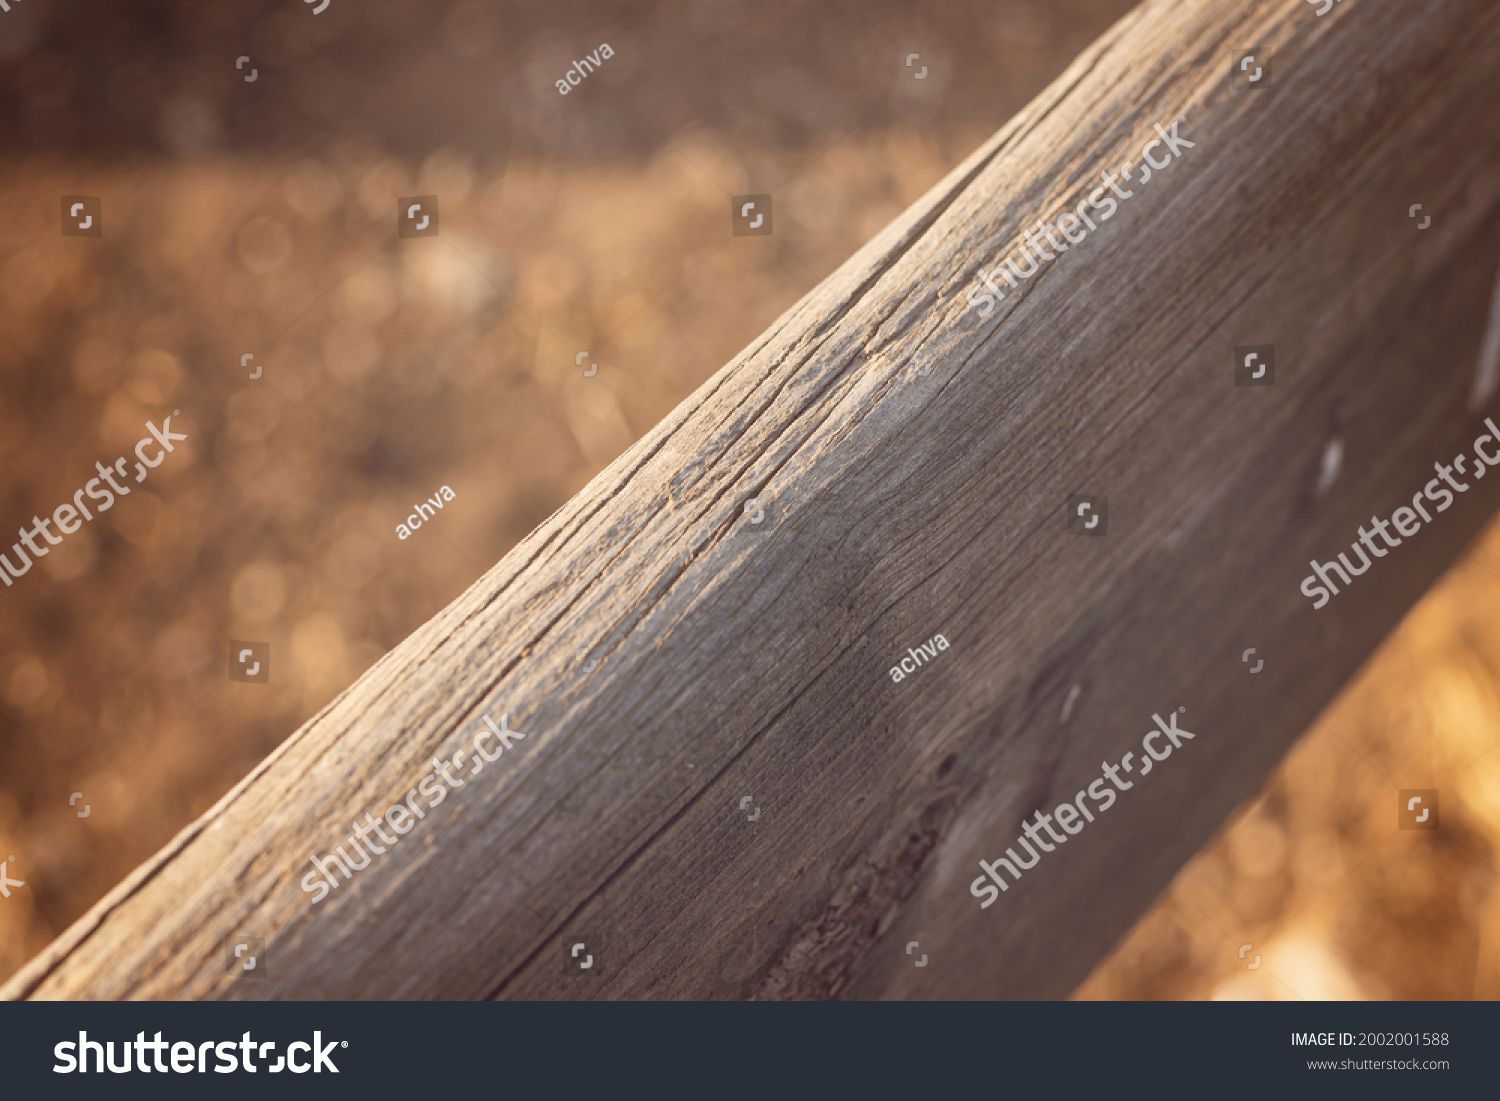 stock-photo-close-up-of-a-natural-wooden-beam-2002001588.jpg